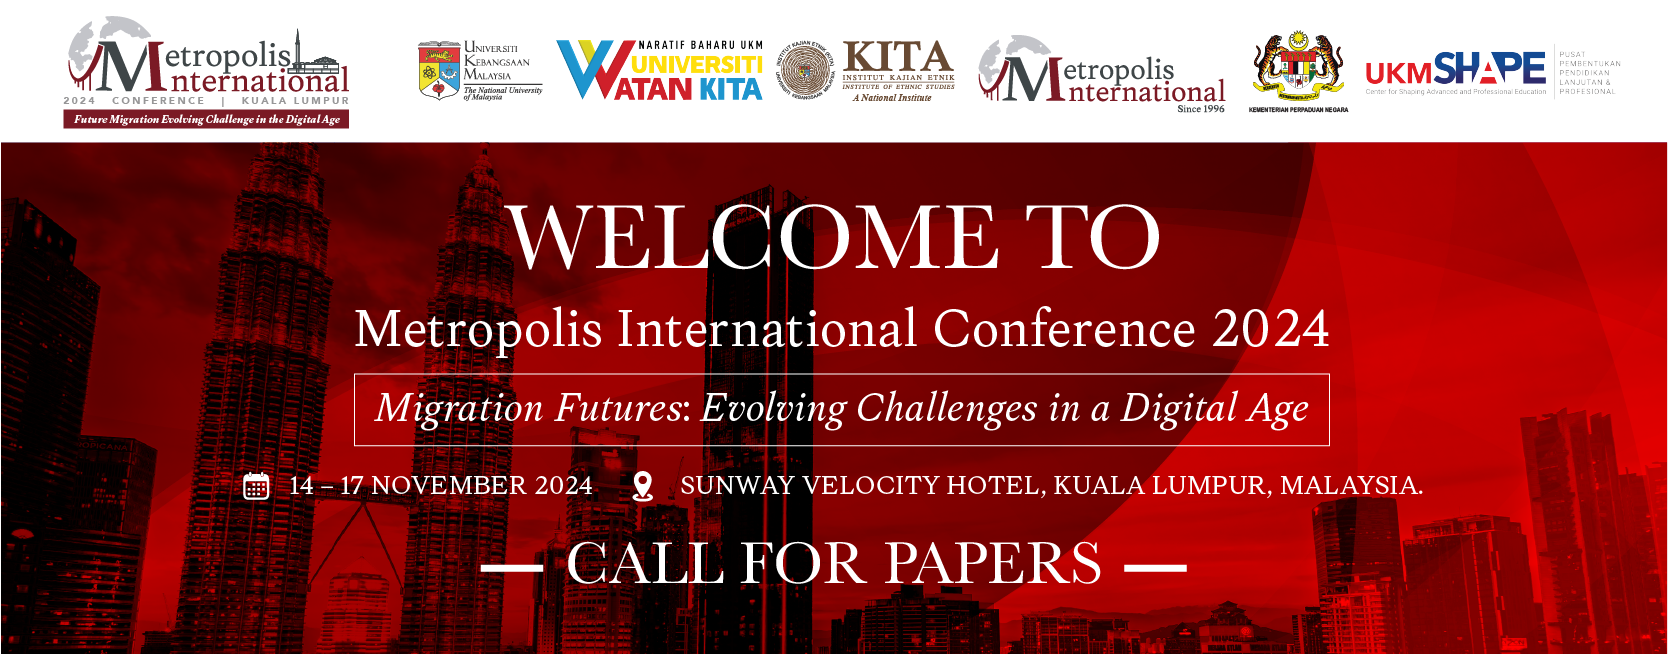 Metropolis International Conference 2024 Call for Paper